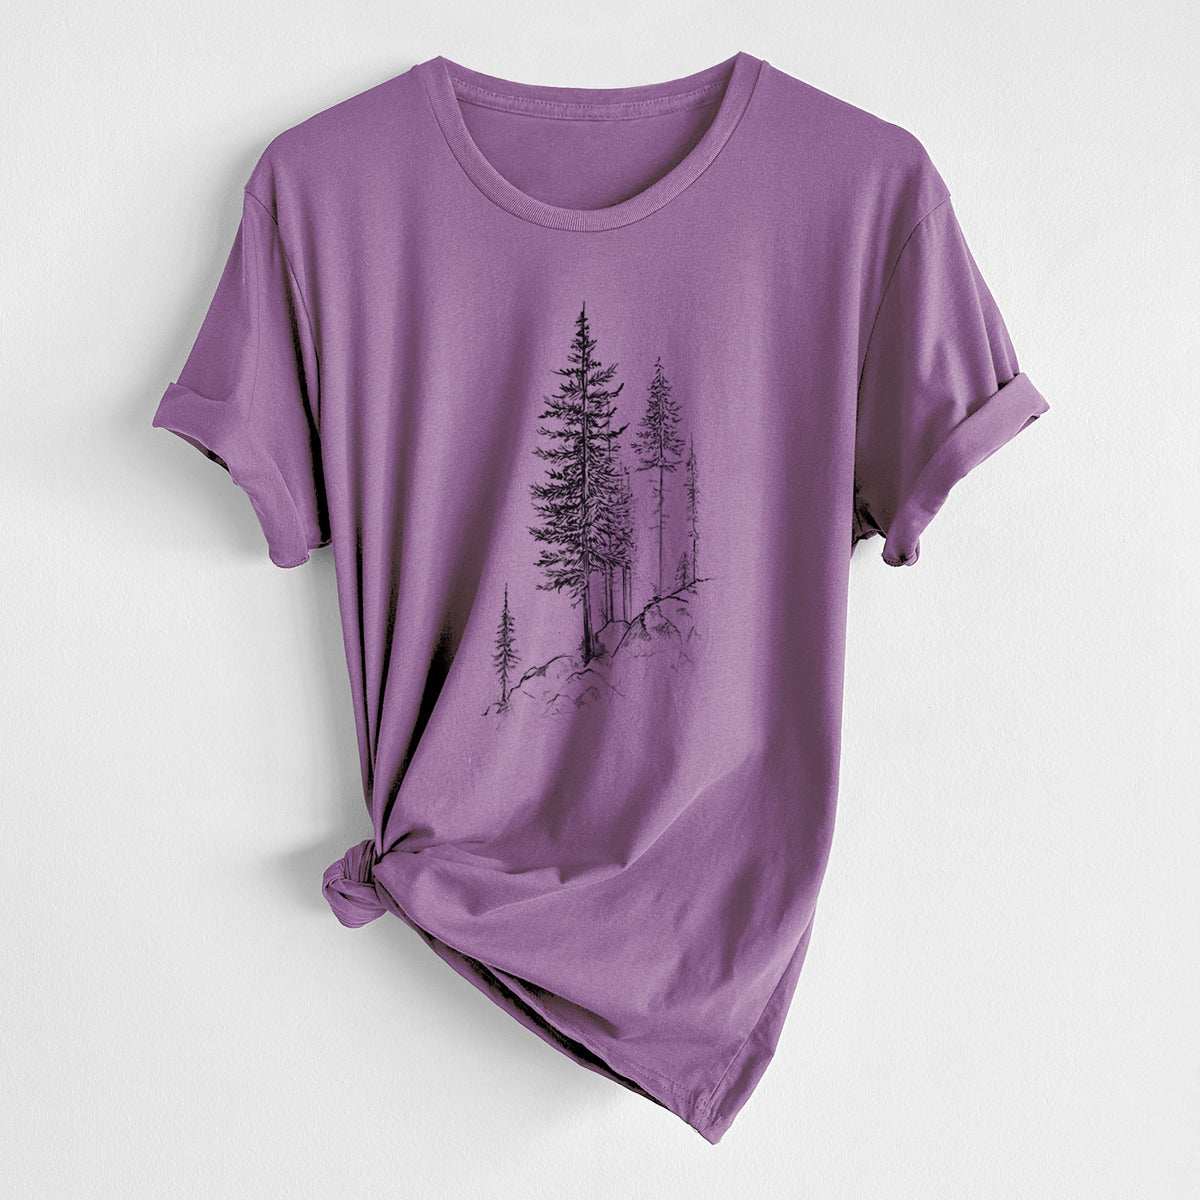 Cliffside Pines - Unisex Crewneck - Made in USA - 100% Organic Cotton